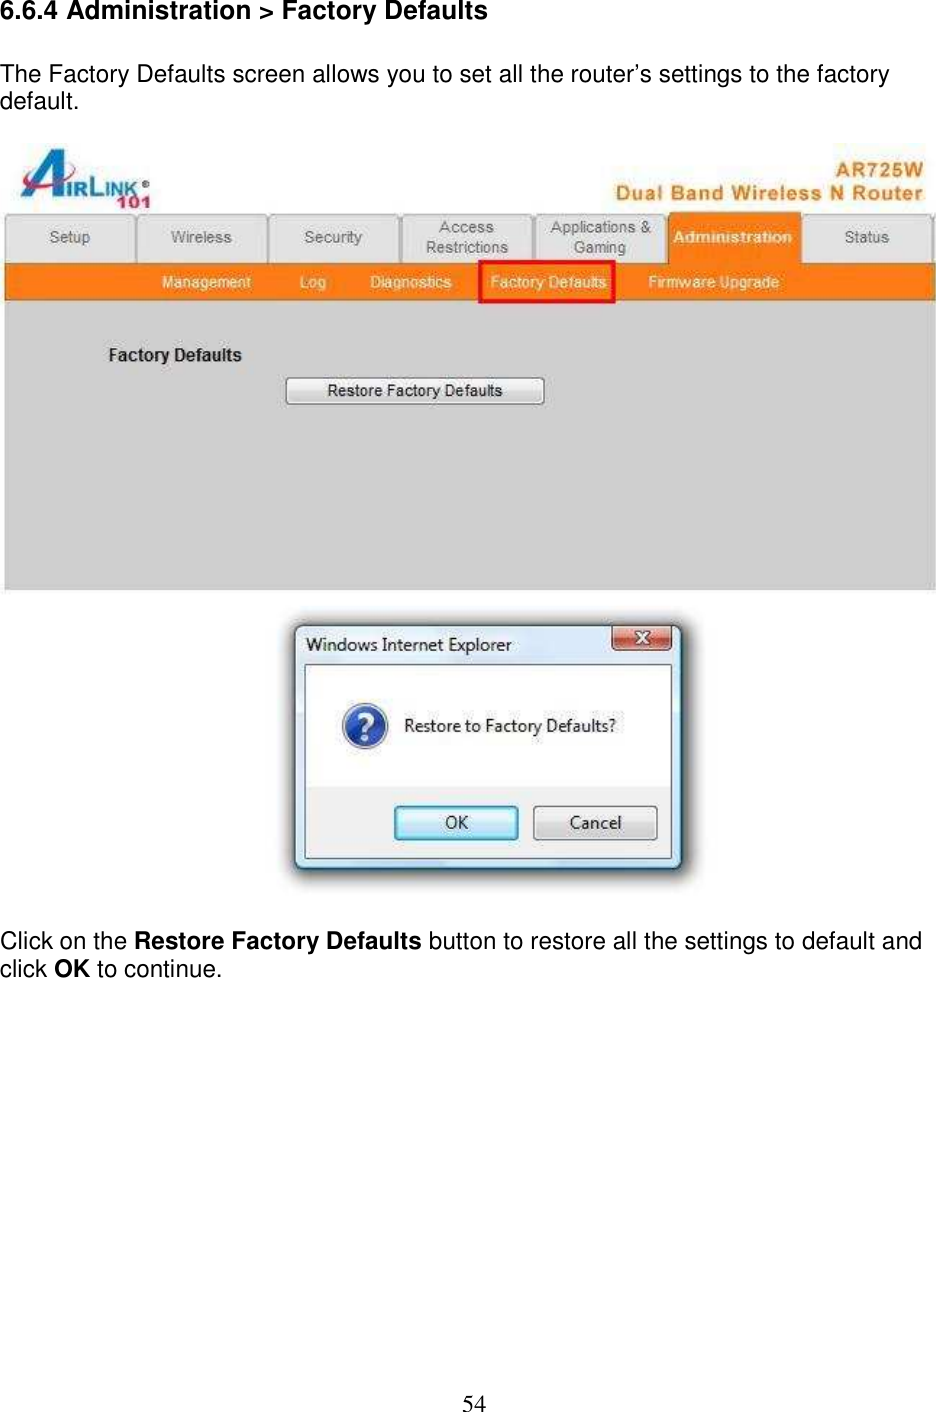 54 6.6.4 Administration &gt; Factory Defaults  The Factory Defaults screen allows you to set all the router’s settings to the factory default.    Click on the Restore Factory Defaults button to restore all the settings to default and click OK to continue.               